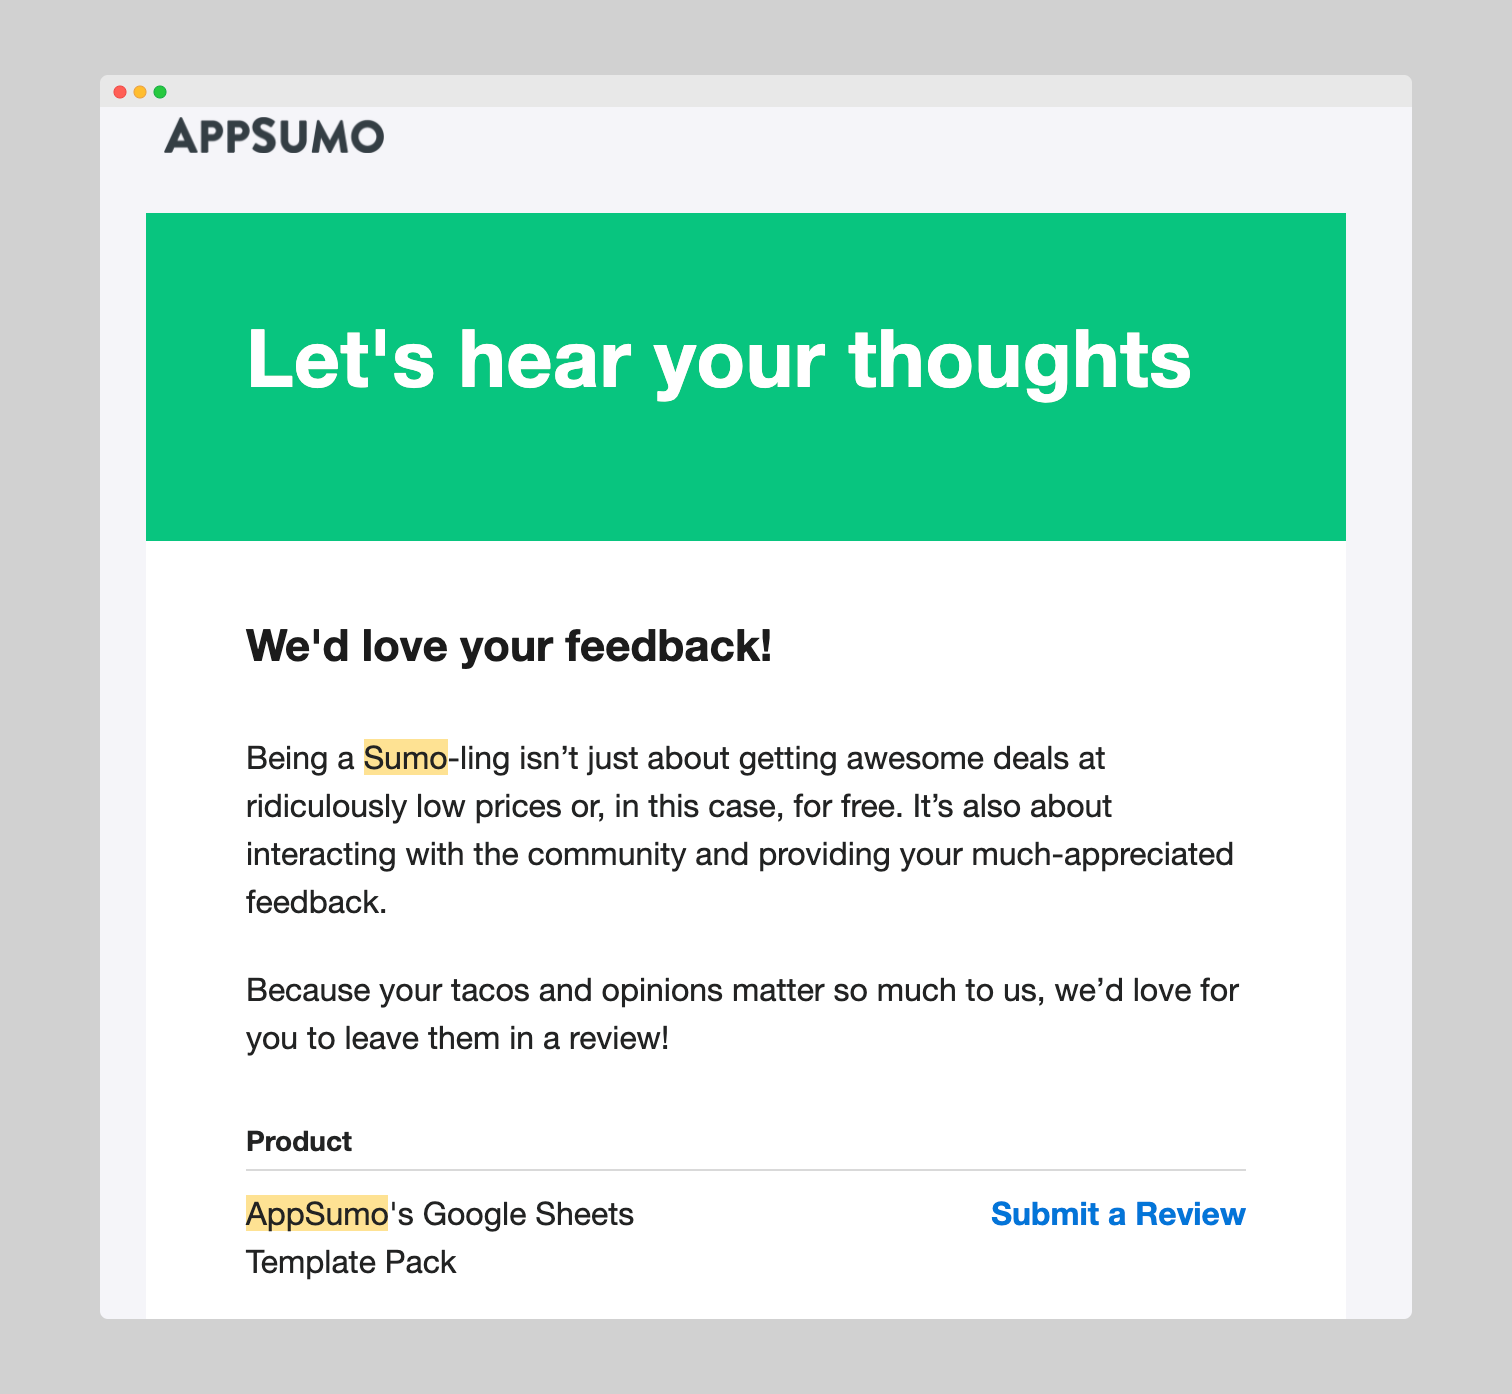 Email Marketing Strategy: AppSumo post-purchase email example